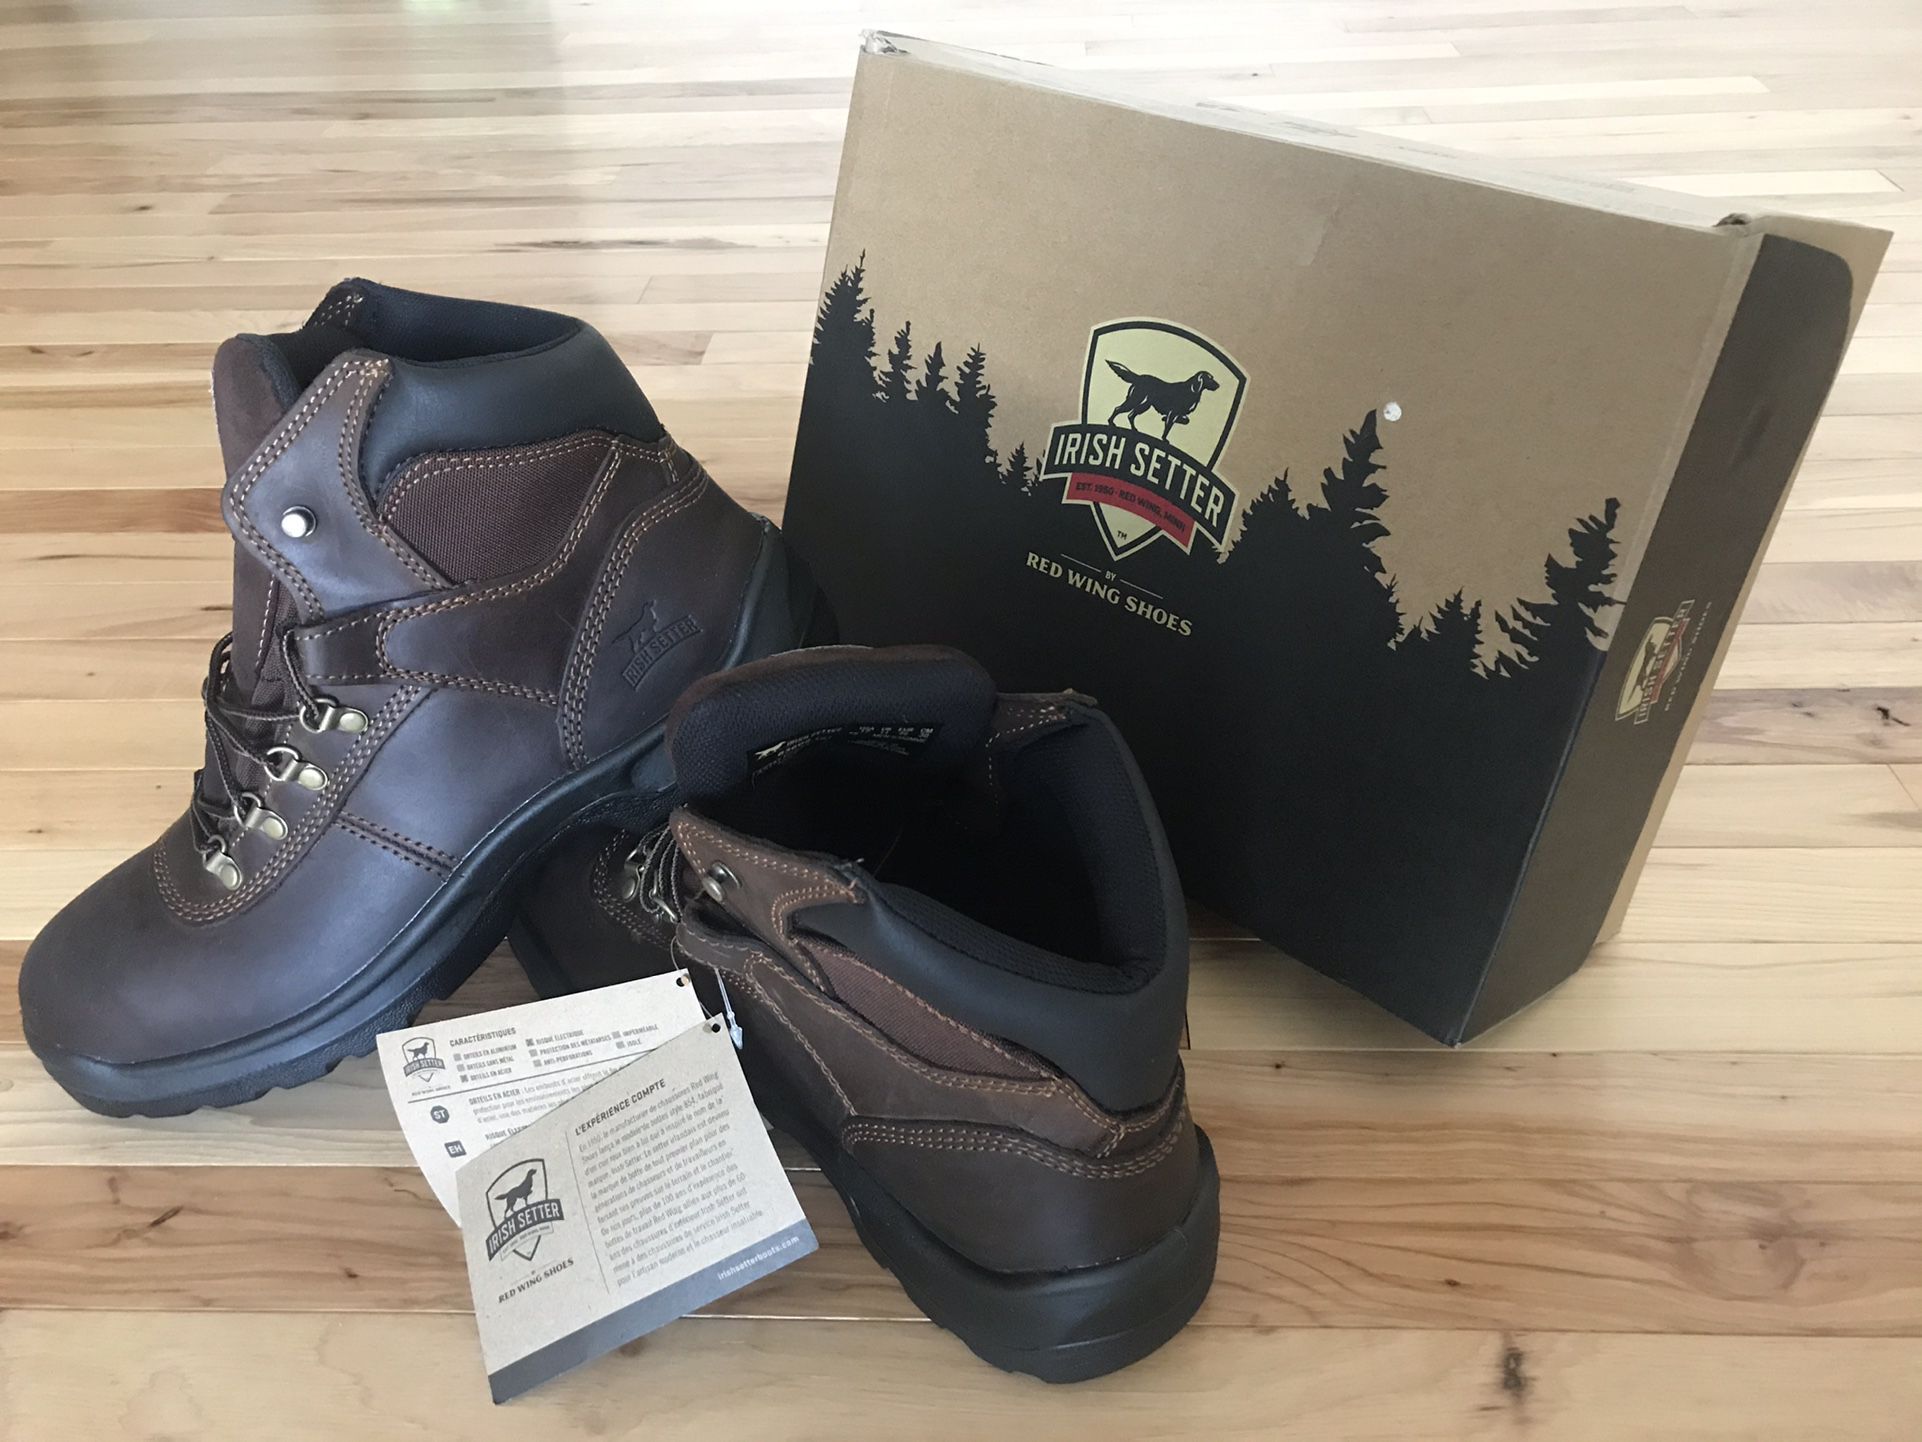 Red Wing Boots(Leather), Irish Setter . Steel Toe Safety Boots !! Size 12 , Brand New in Box !!!!